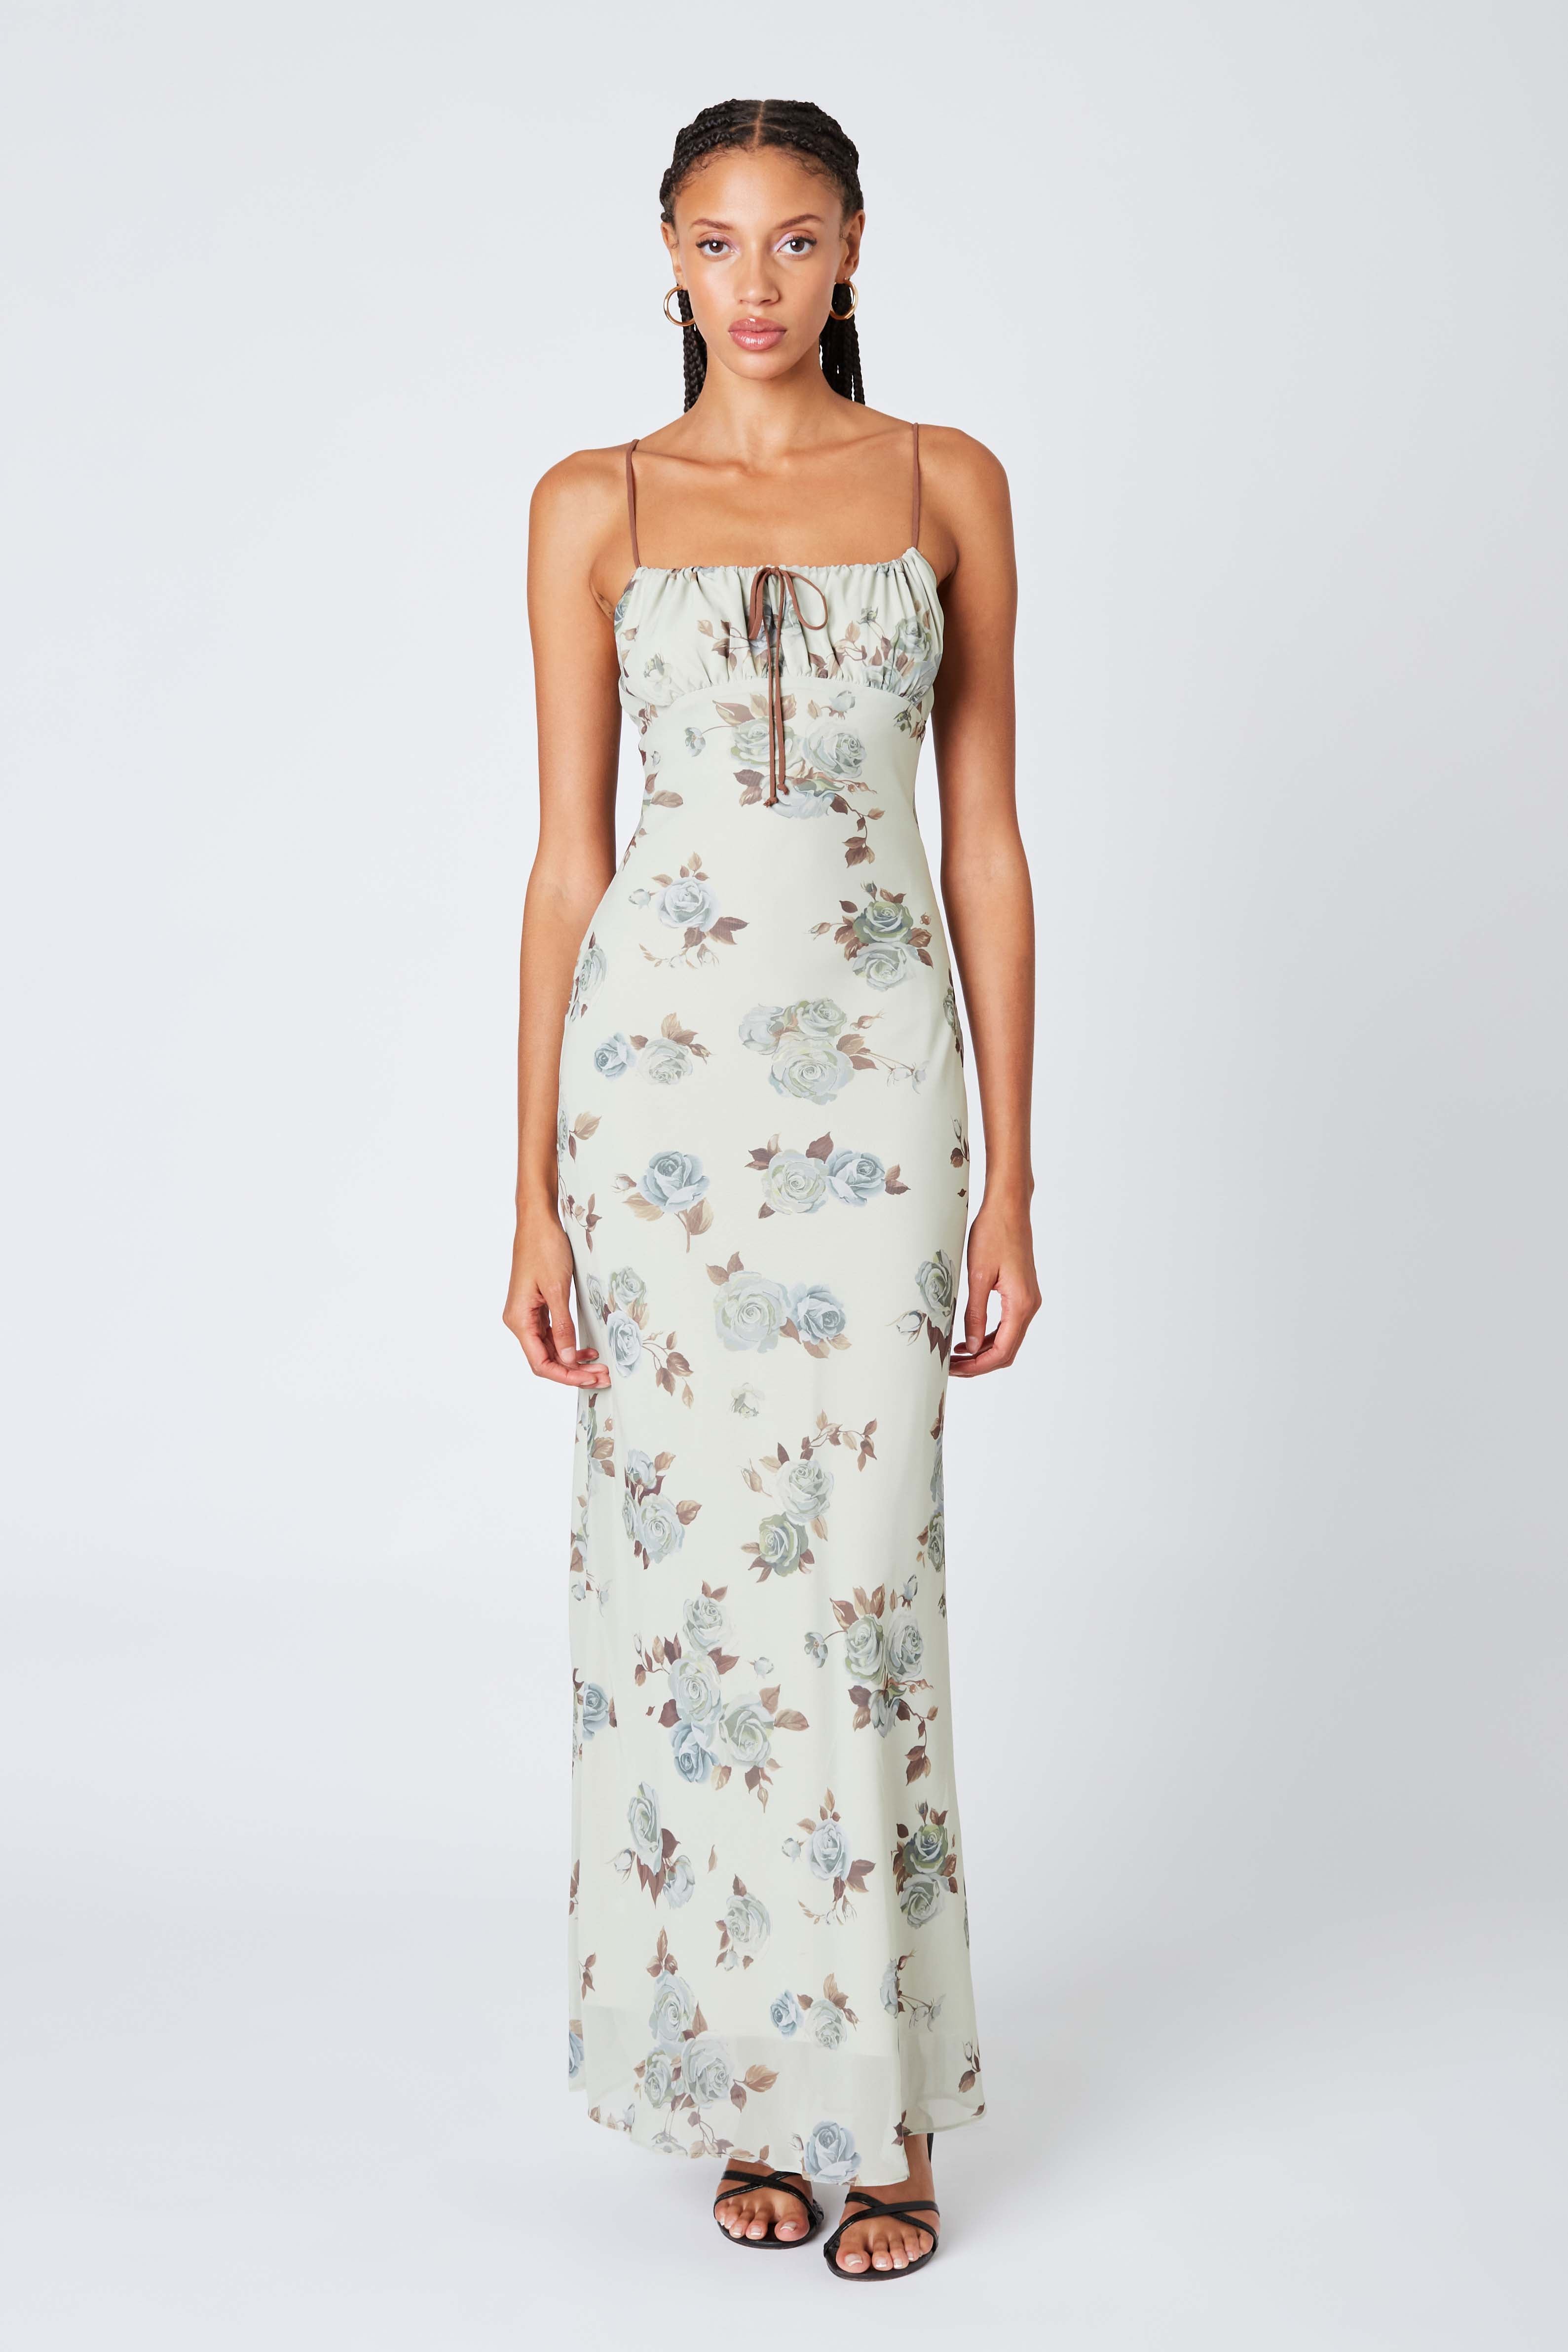 Floral Maxi Dress in Fern Front View